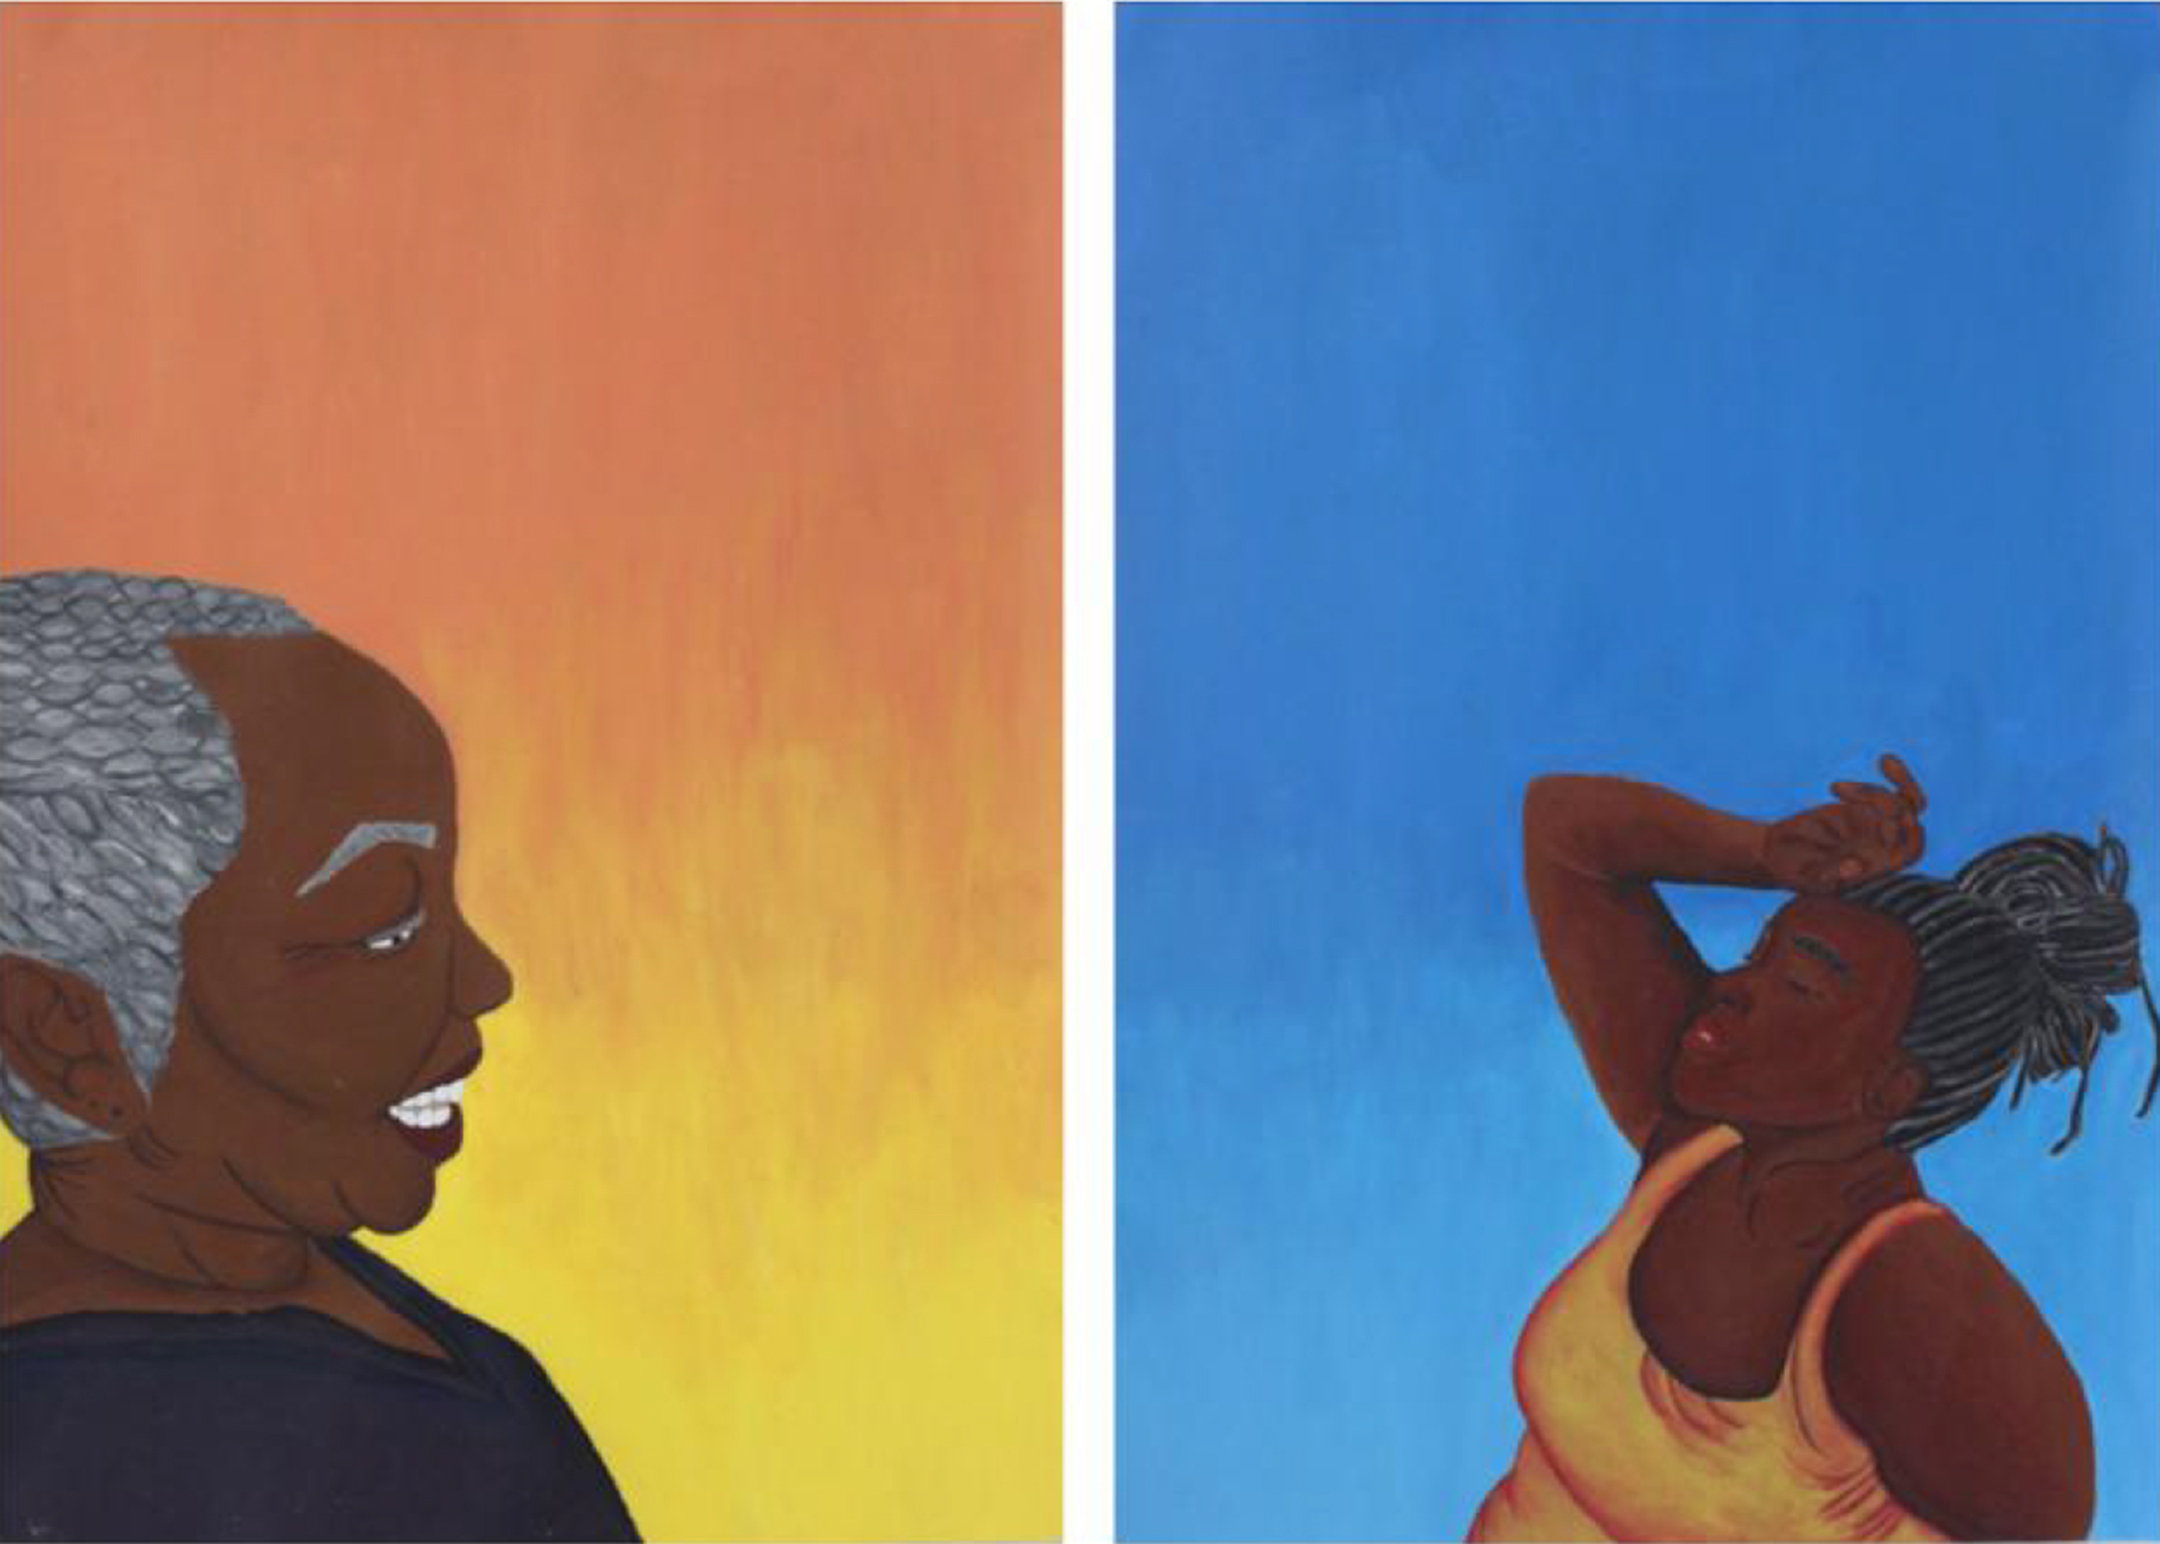 Painting of an old woman against a burnt orange background, on left, looking at a young woman against a blue background with a white bar between them